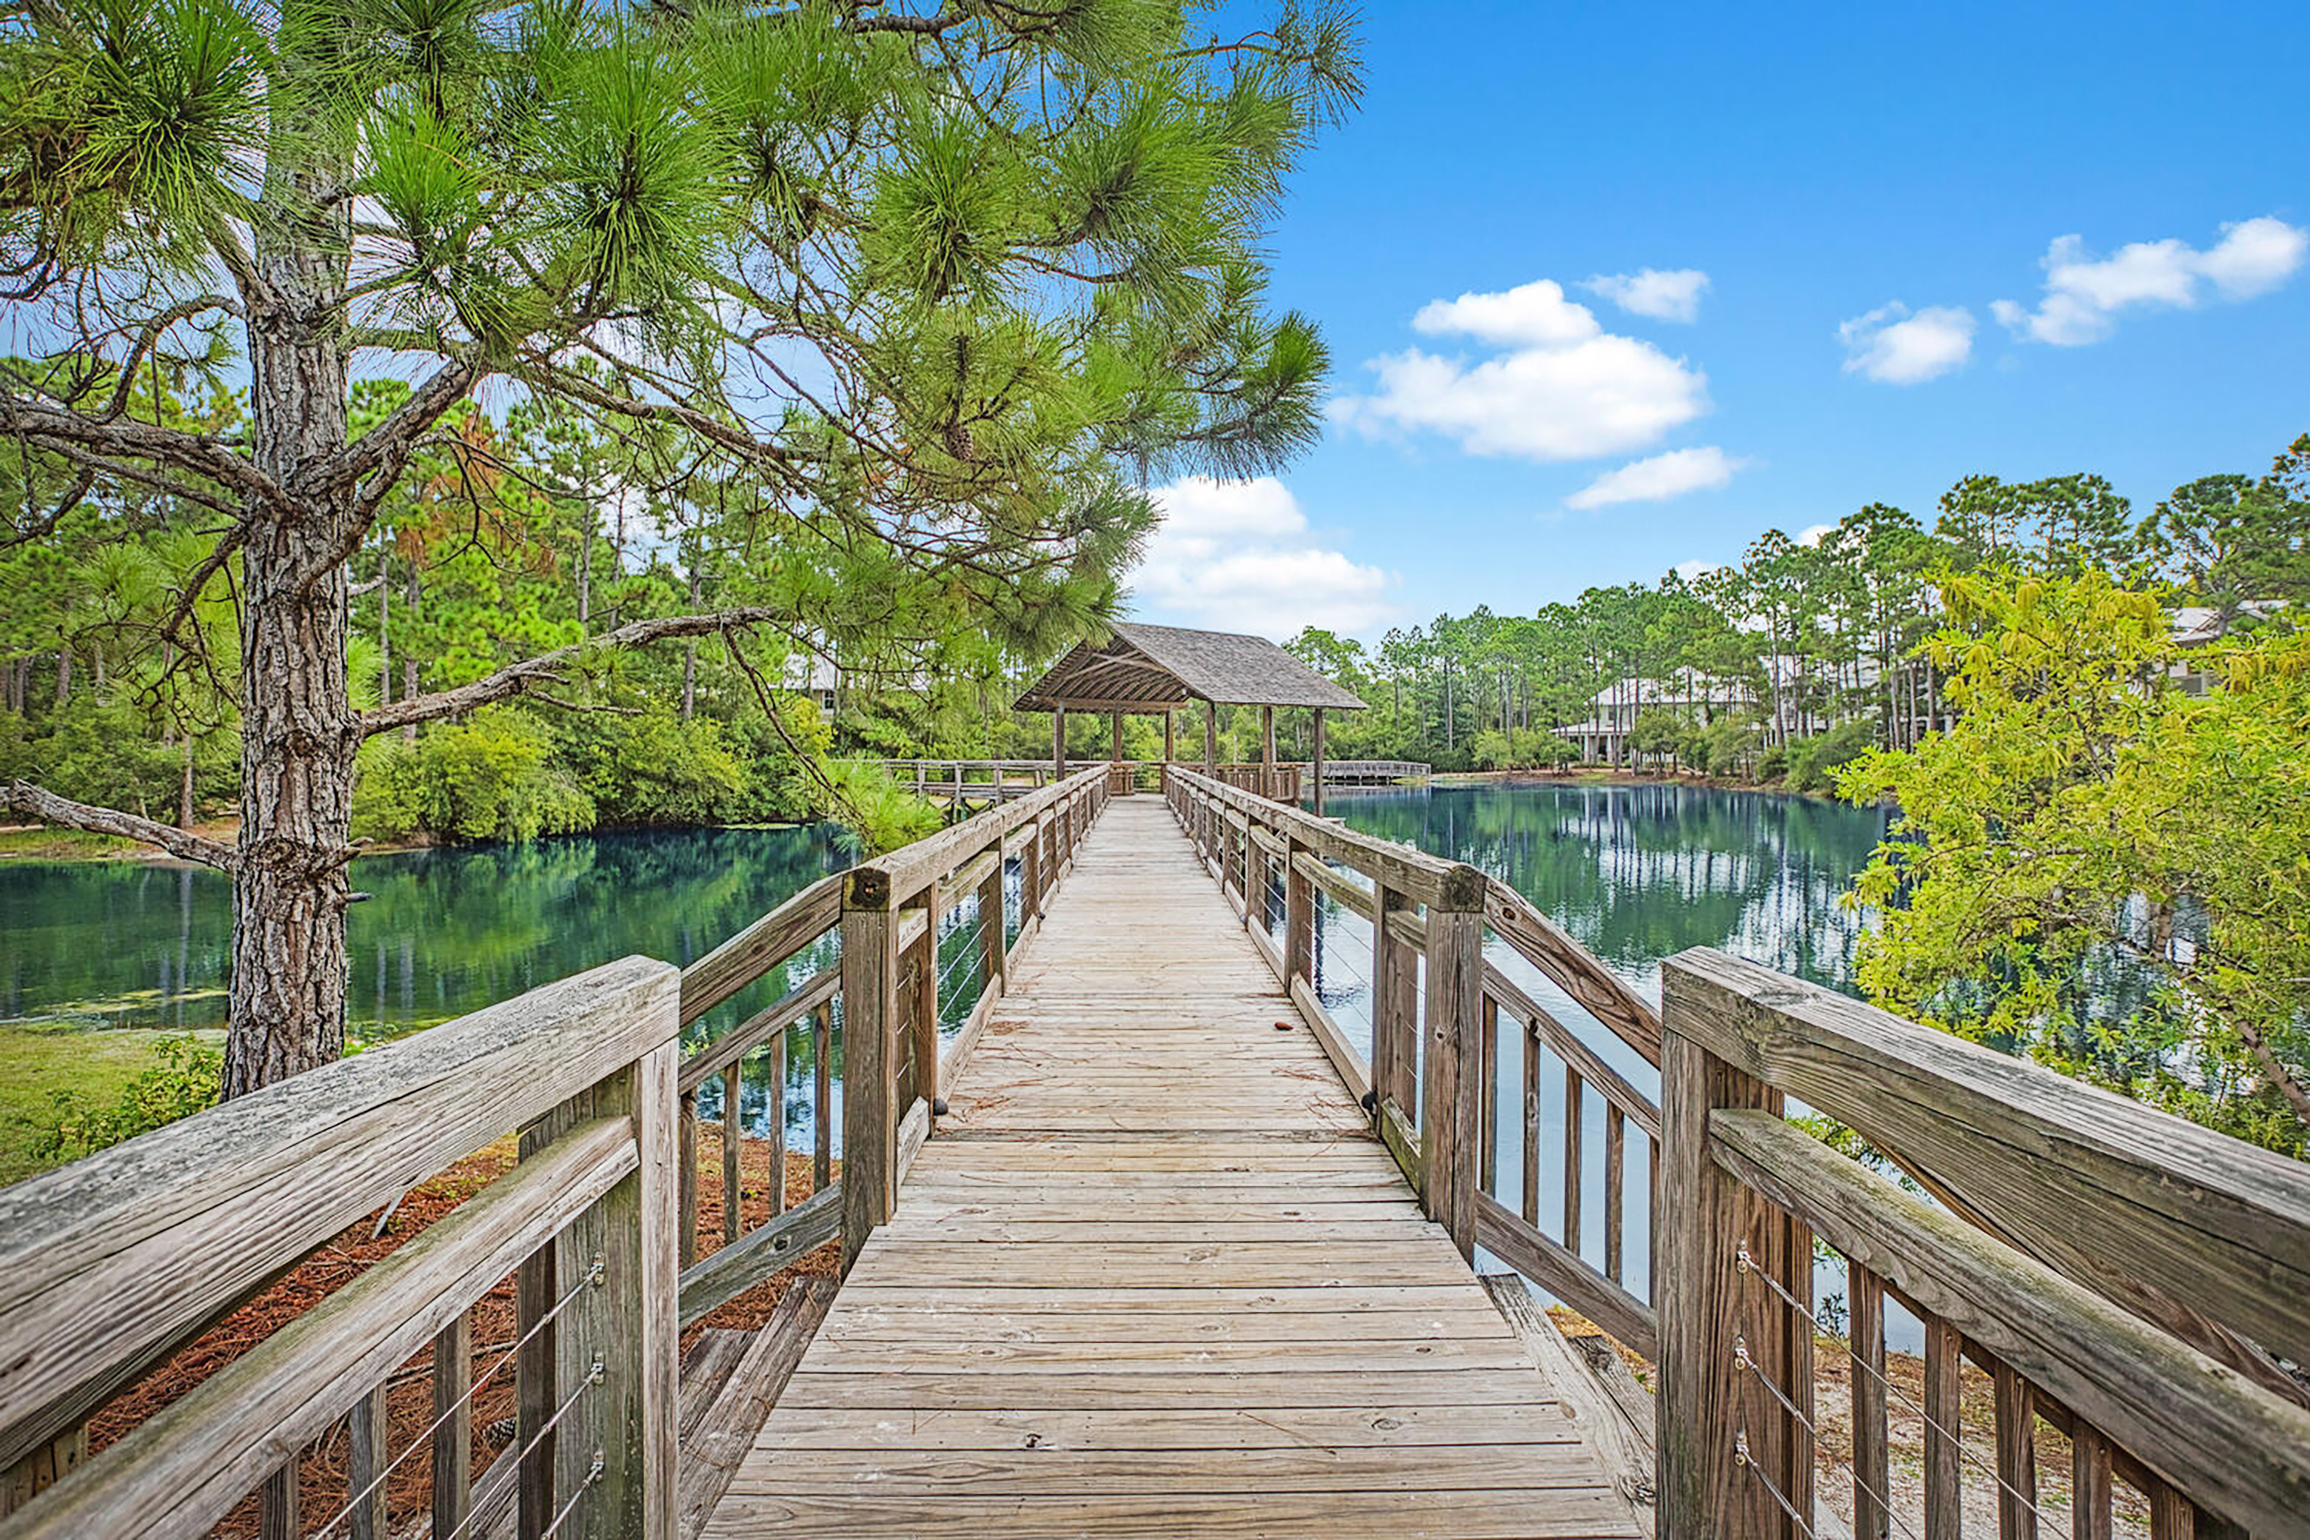 Go for a walk on the boardwalk over the lake